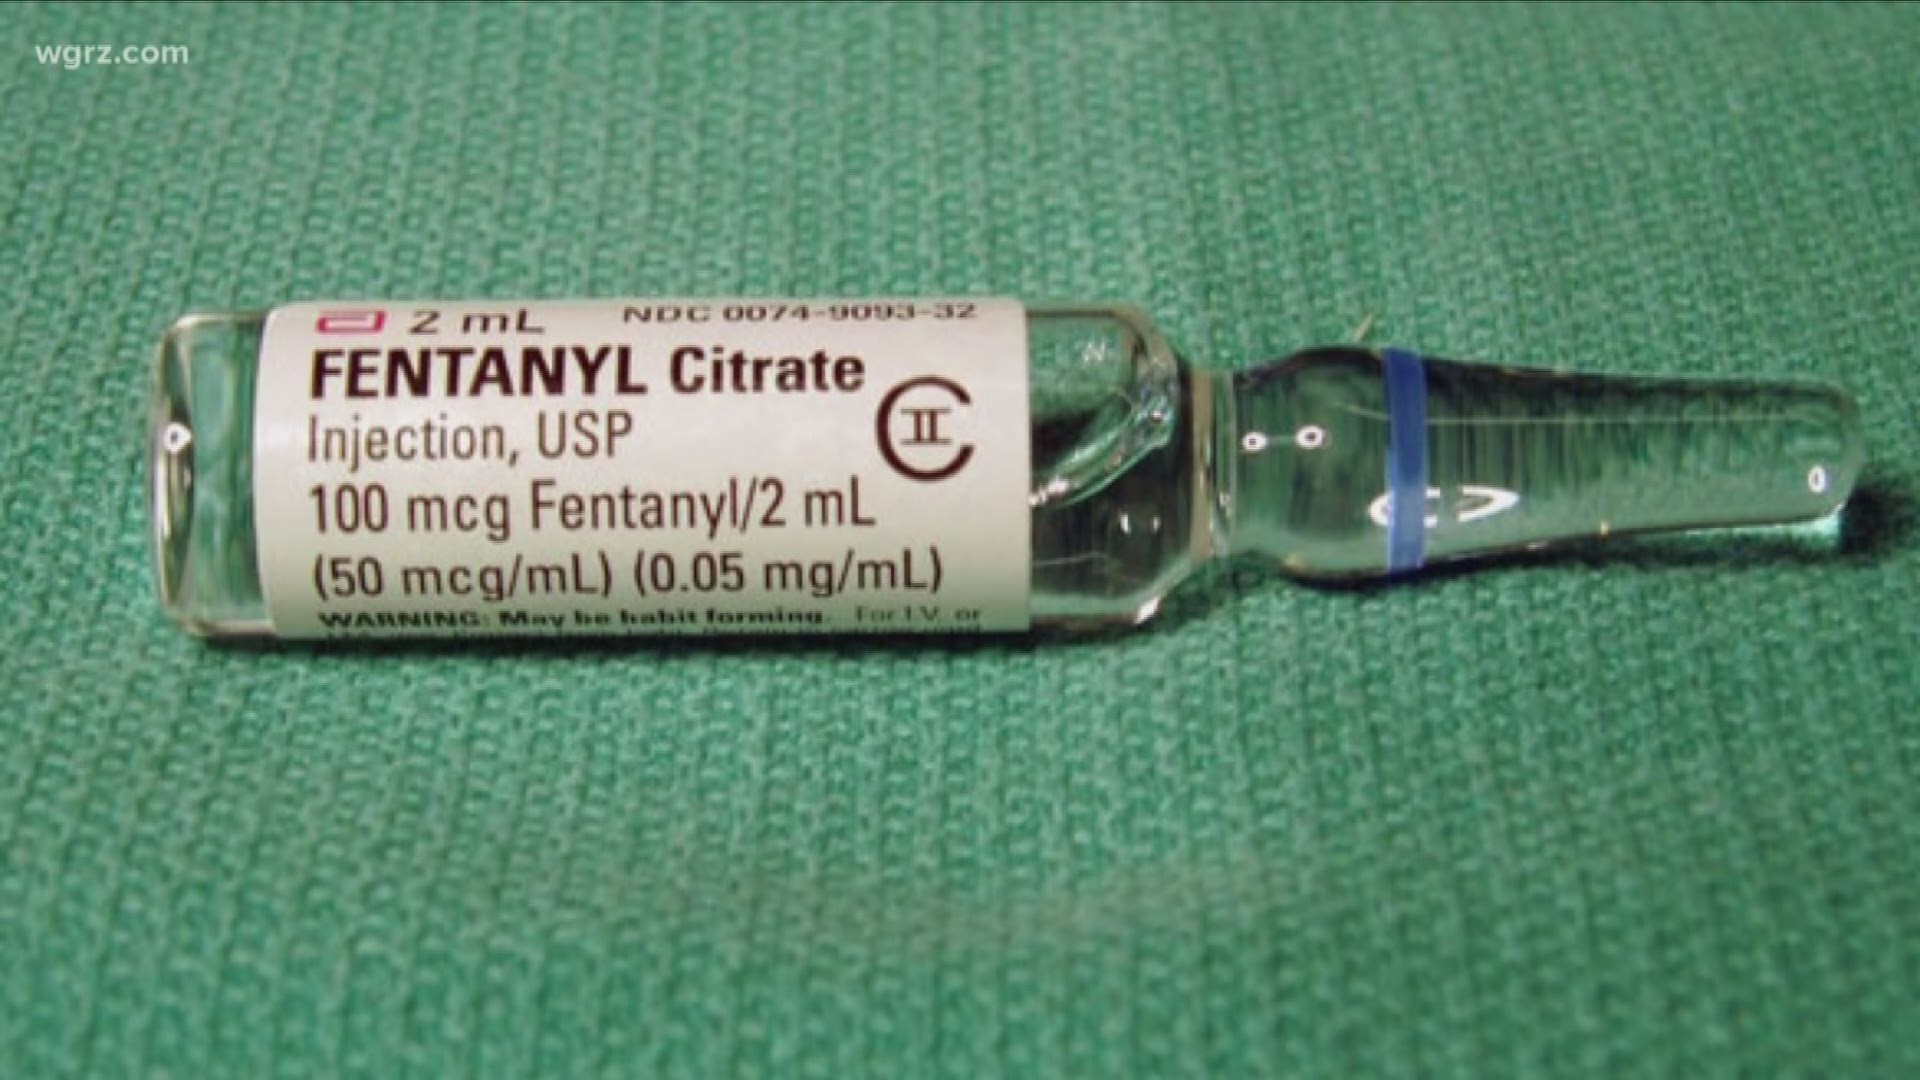 Man Gets Life In Prison For Fentanyl Death